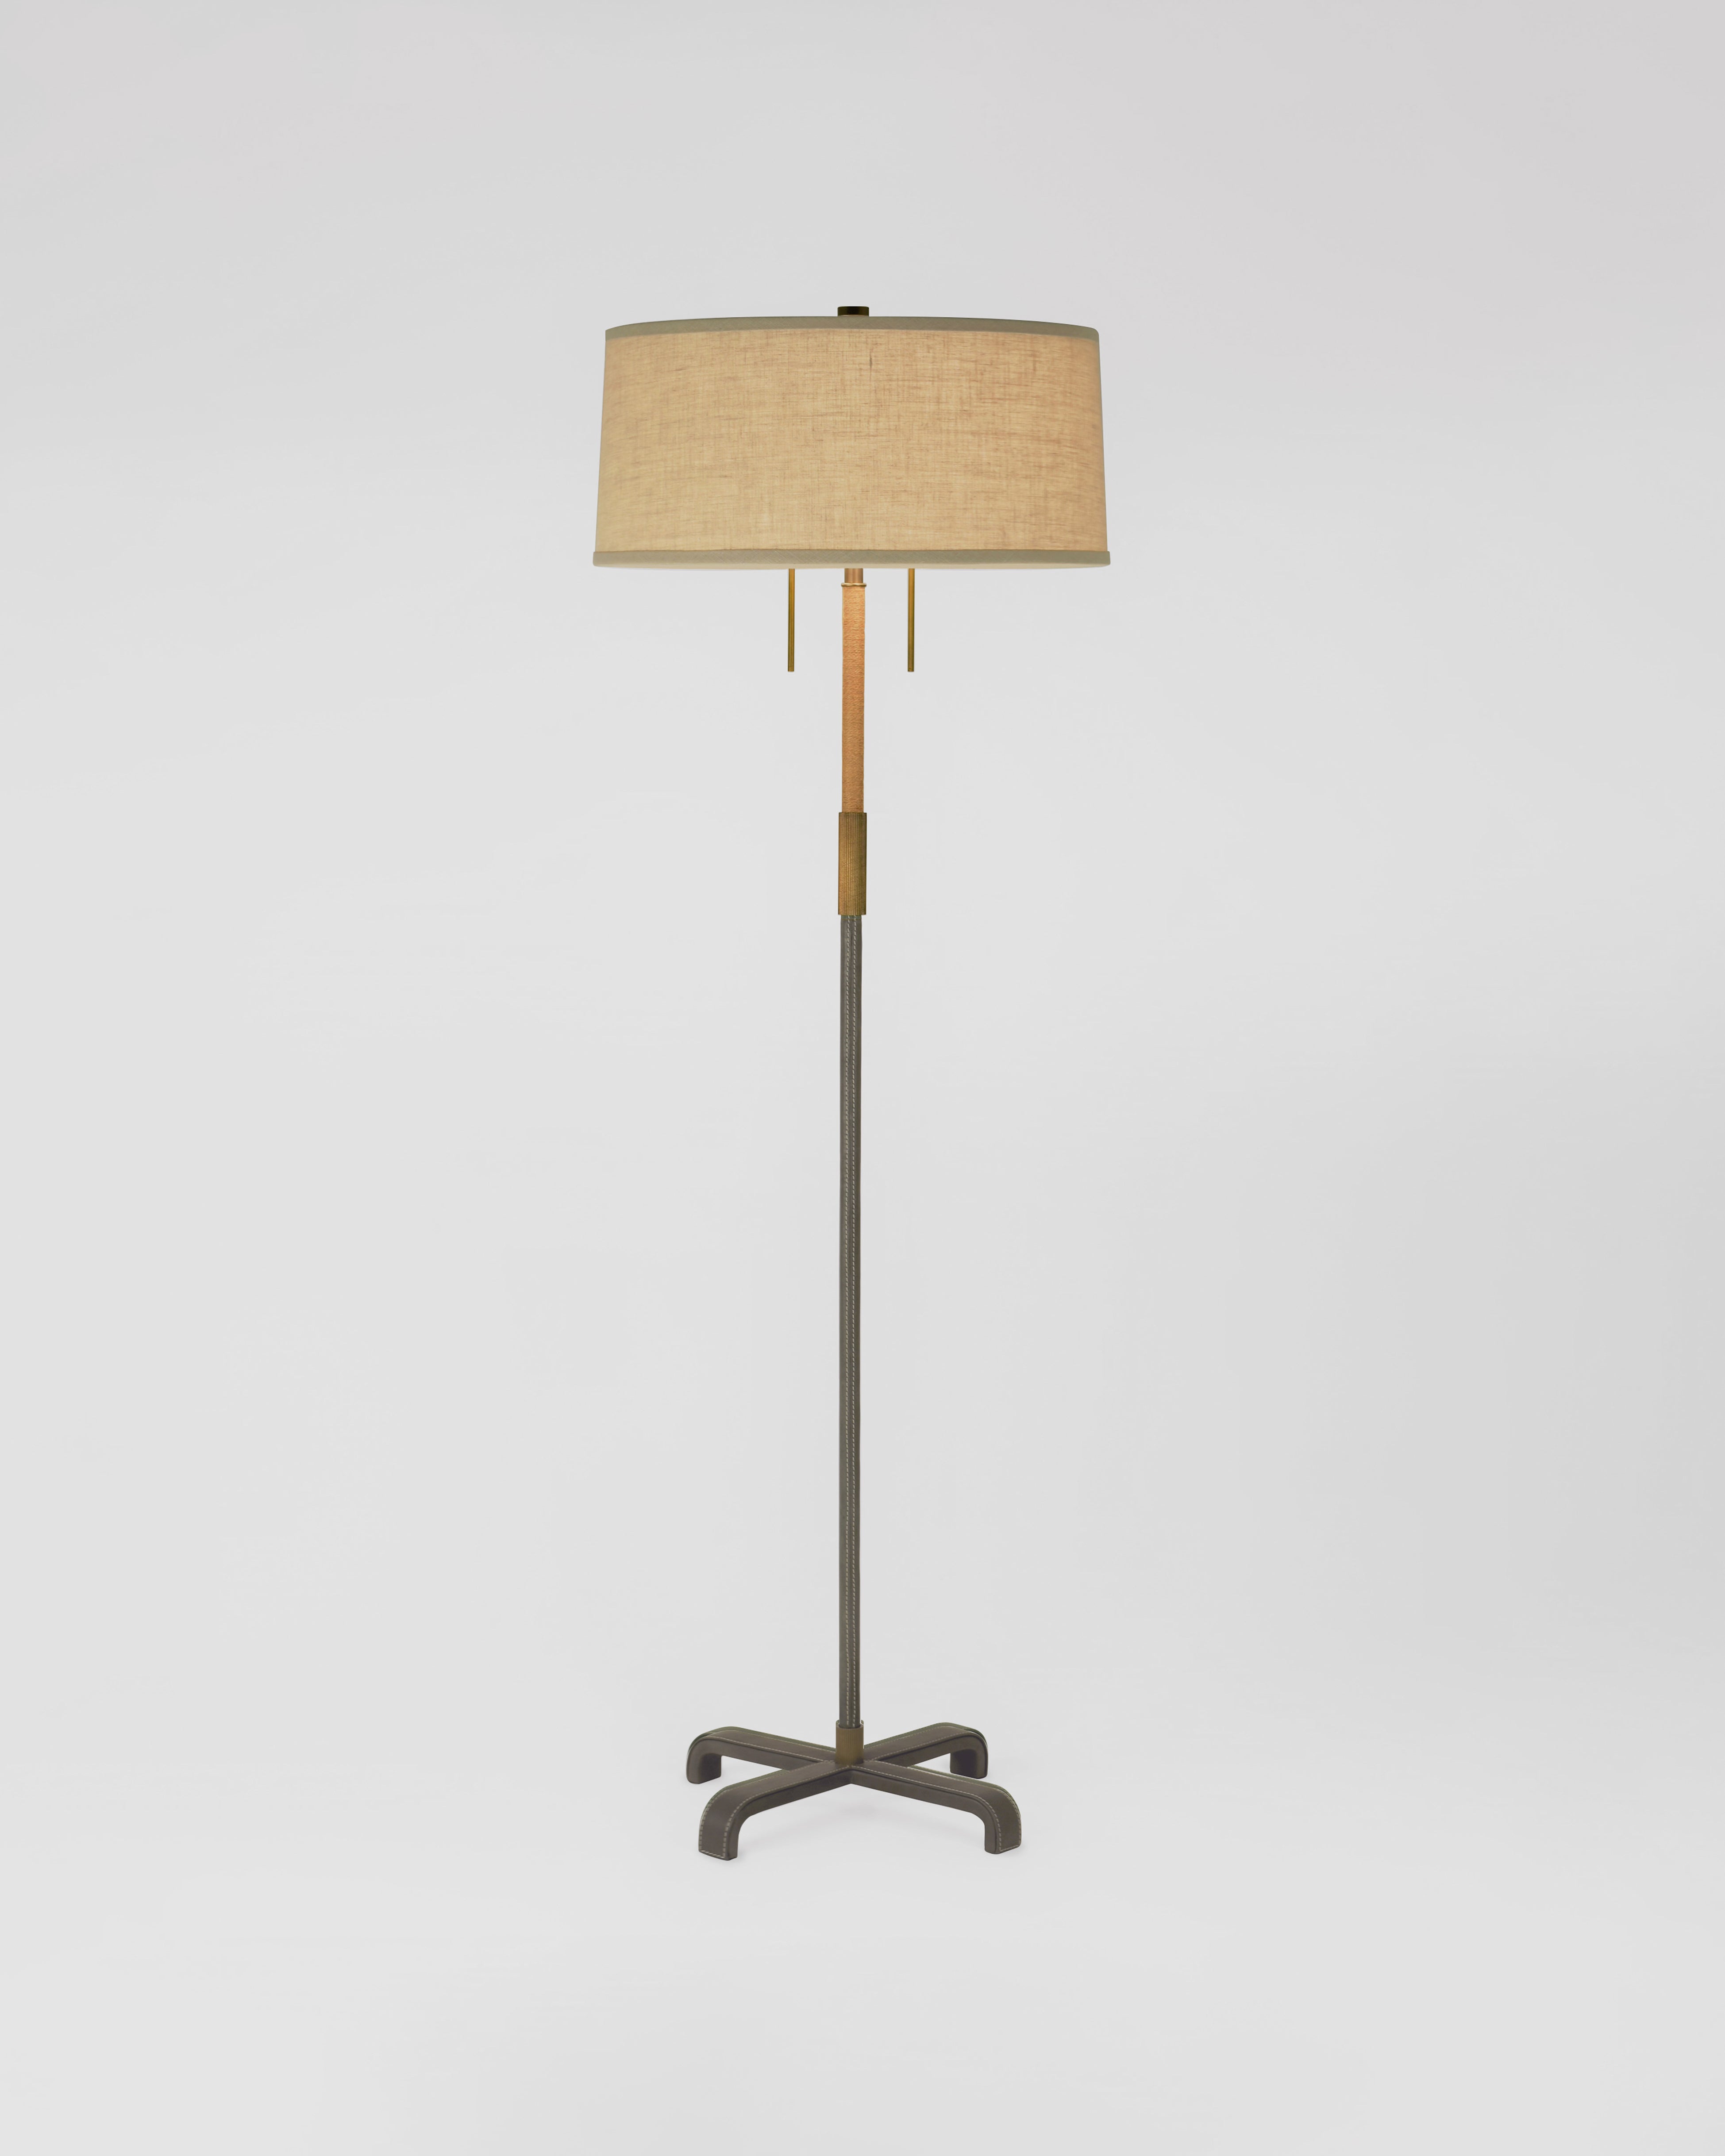 Light Antique Brass and Mink Leather with Jute Wrap and Natural Linen Shade